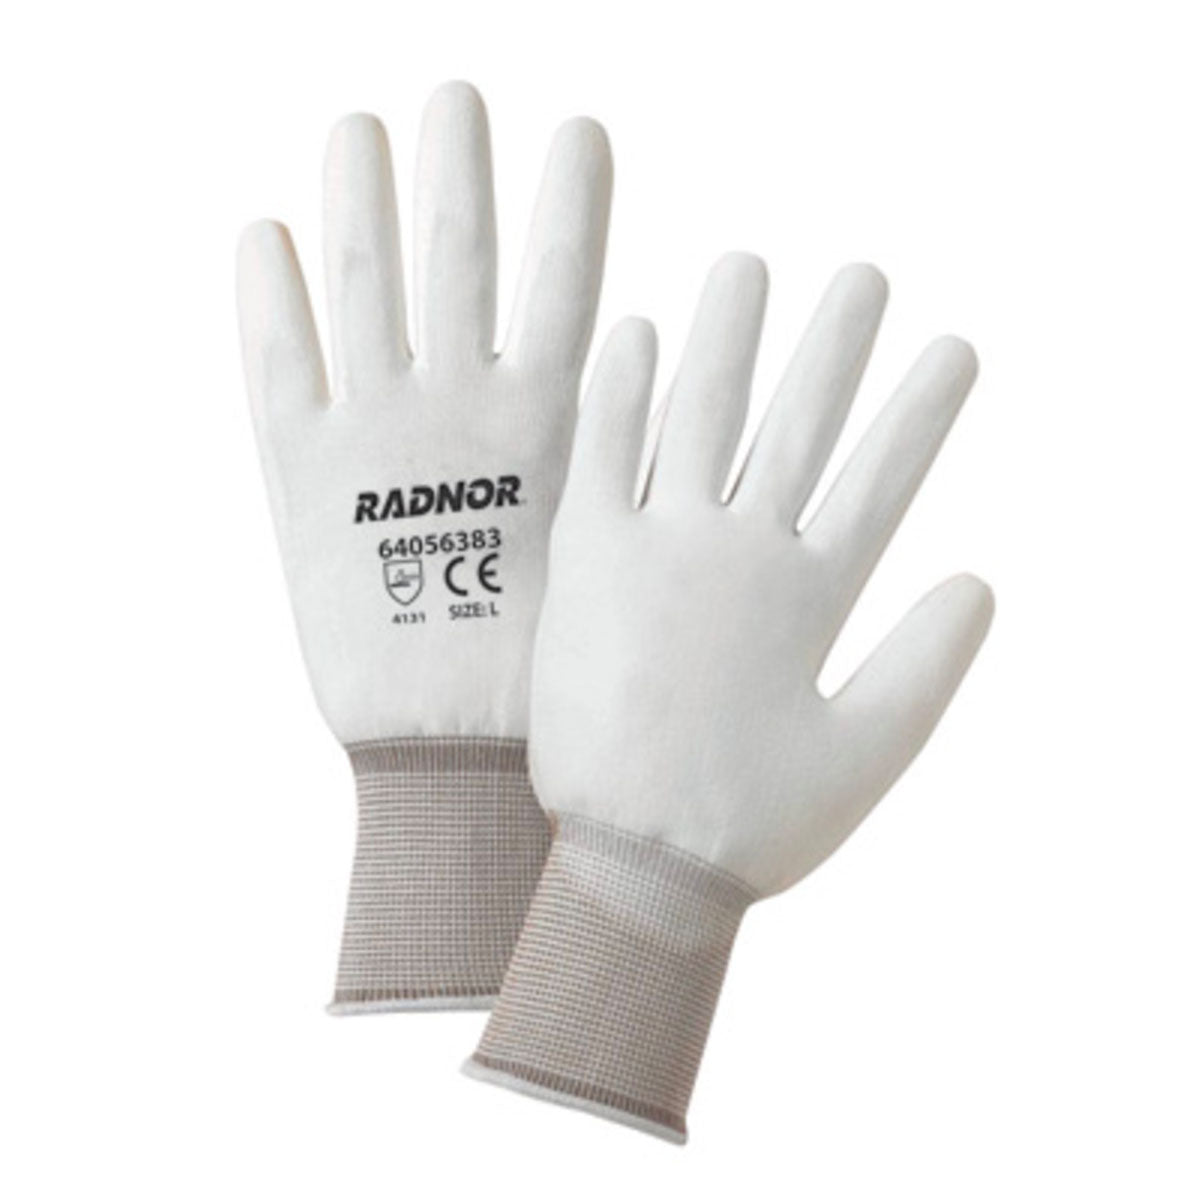 12 Pairs / X-Small / White RADNOR® 15 Gauge Polyurethane Palm And Finger Coated Work Gloves Work Safety Protective Gear